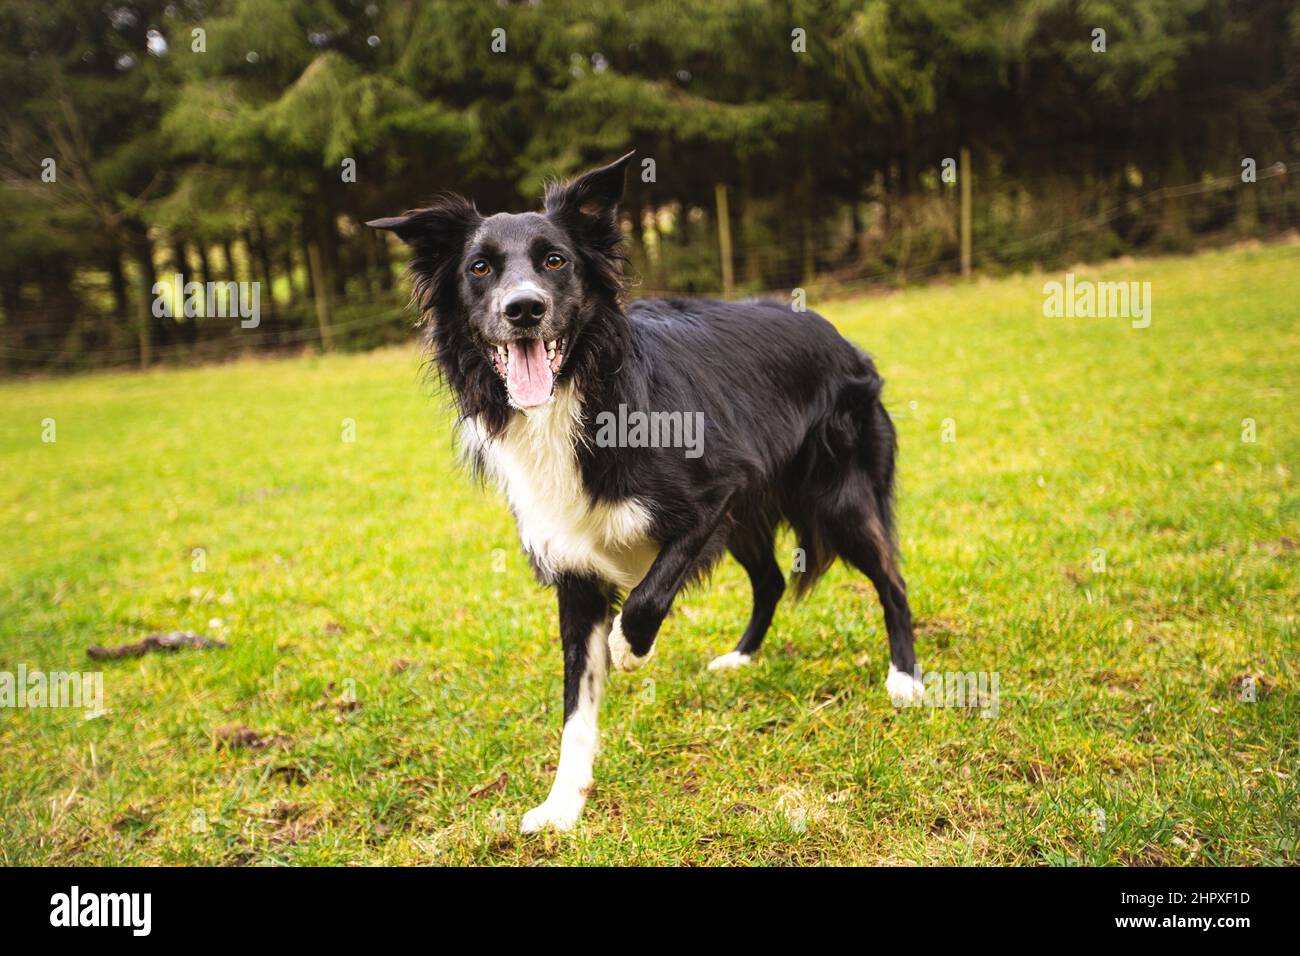 Playful full length purebred border collie dog funny face expression playing outdoors in the city park. Adorable attentive puppy ready to catch the fl Stock Photo